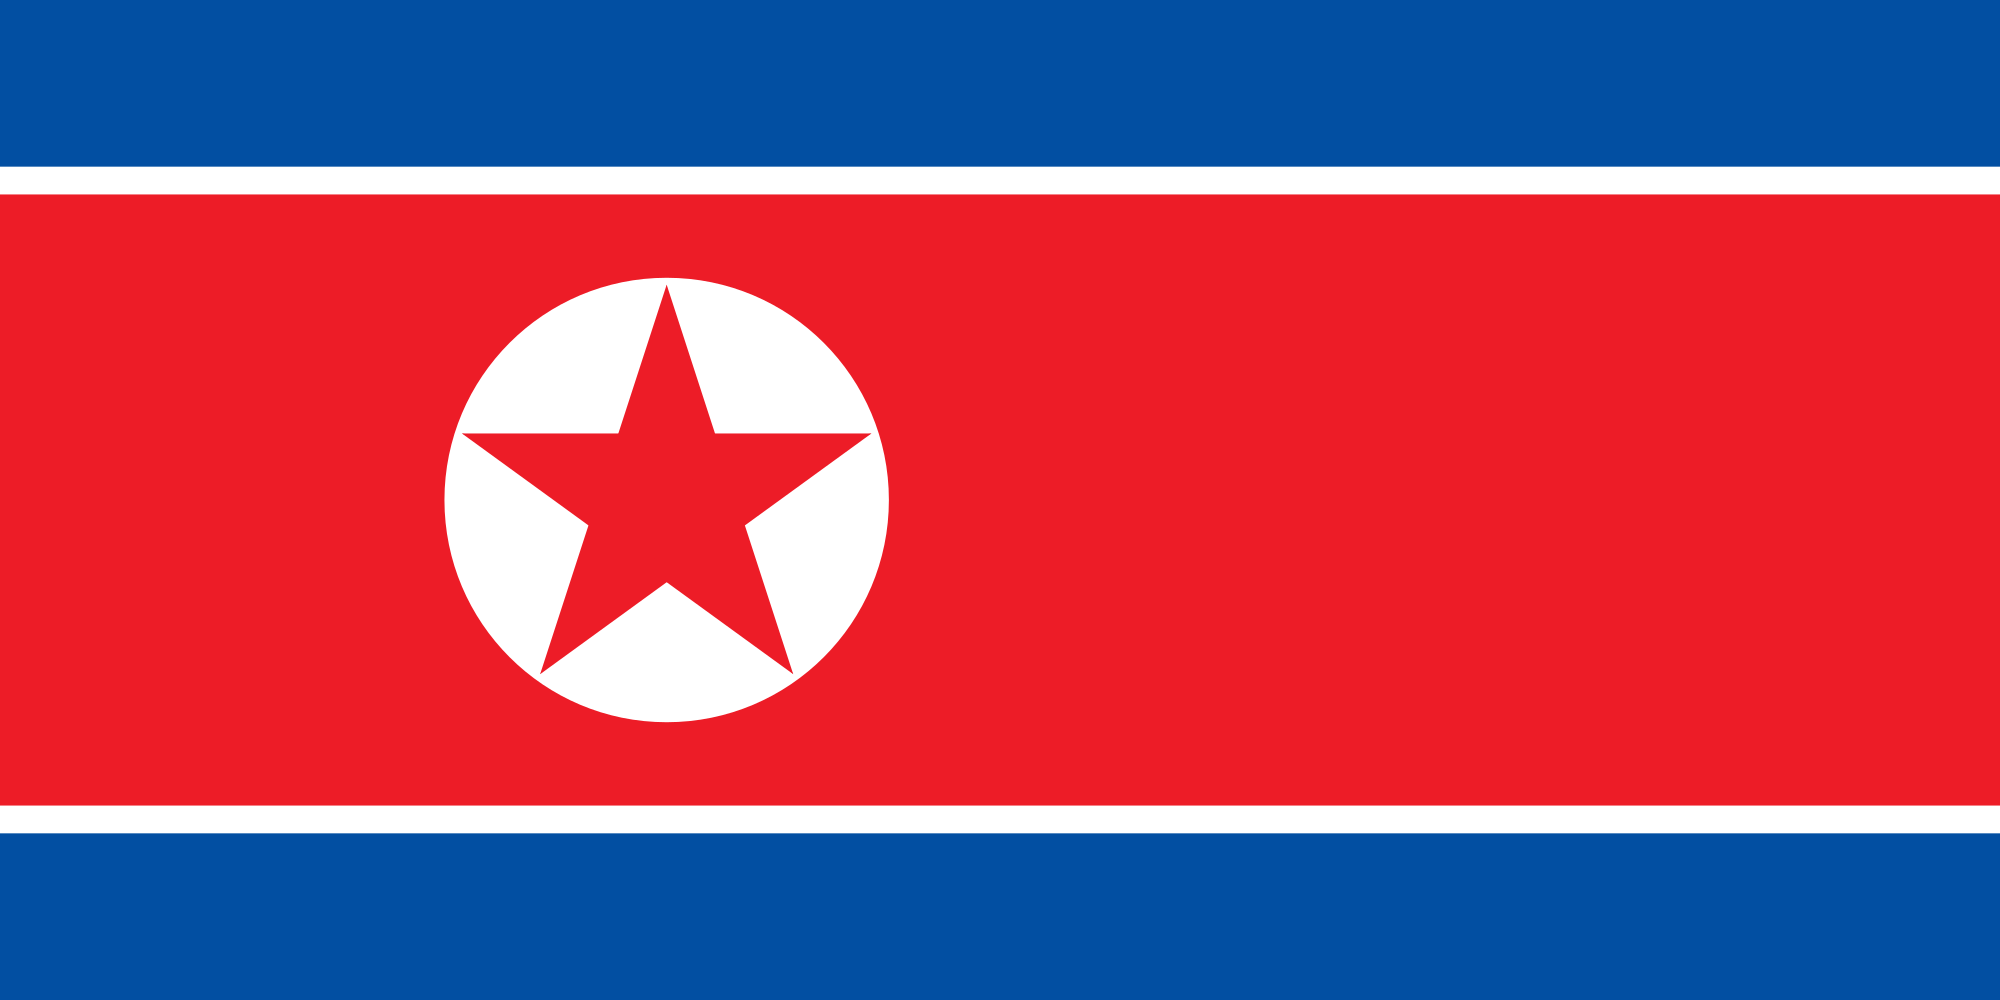 File:The Flag of the DPRK.png